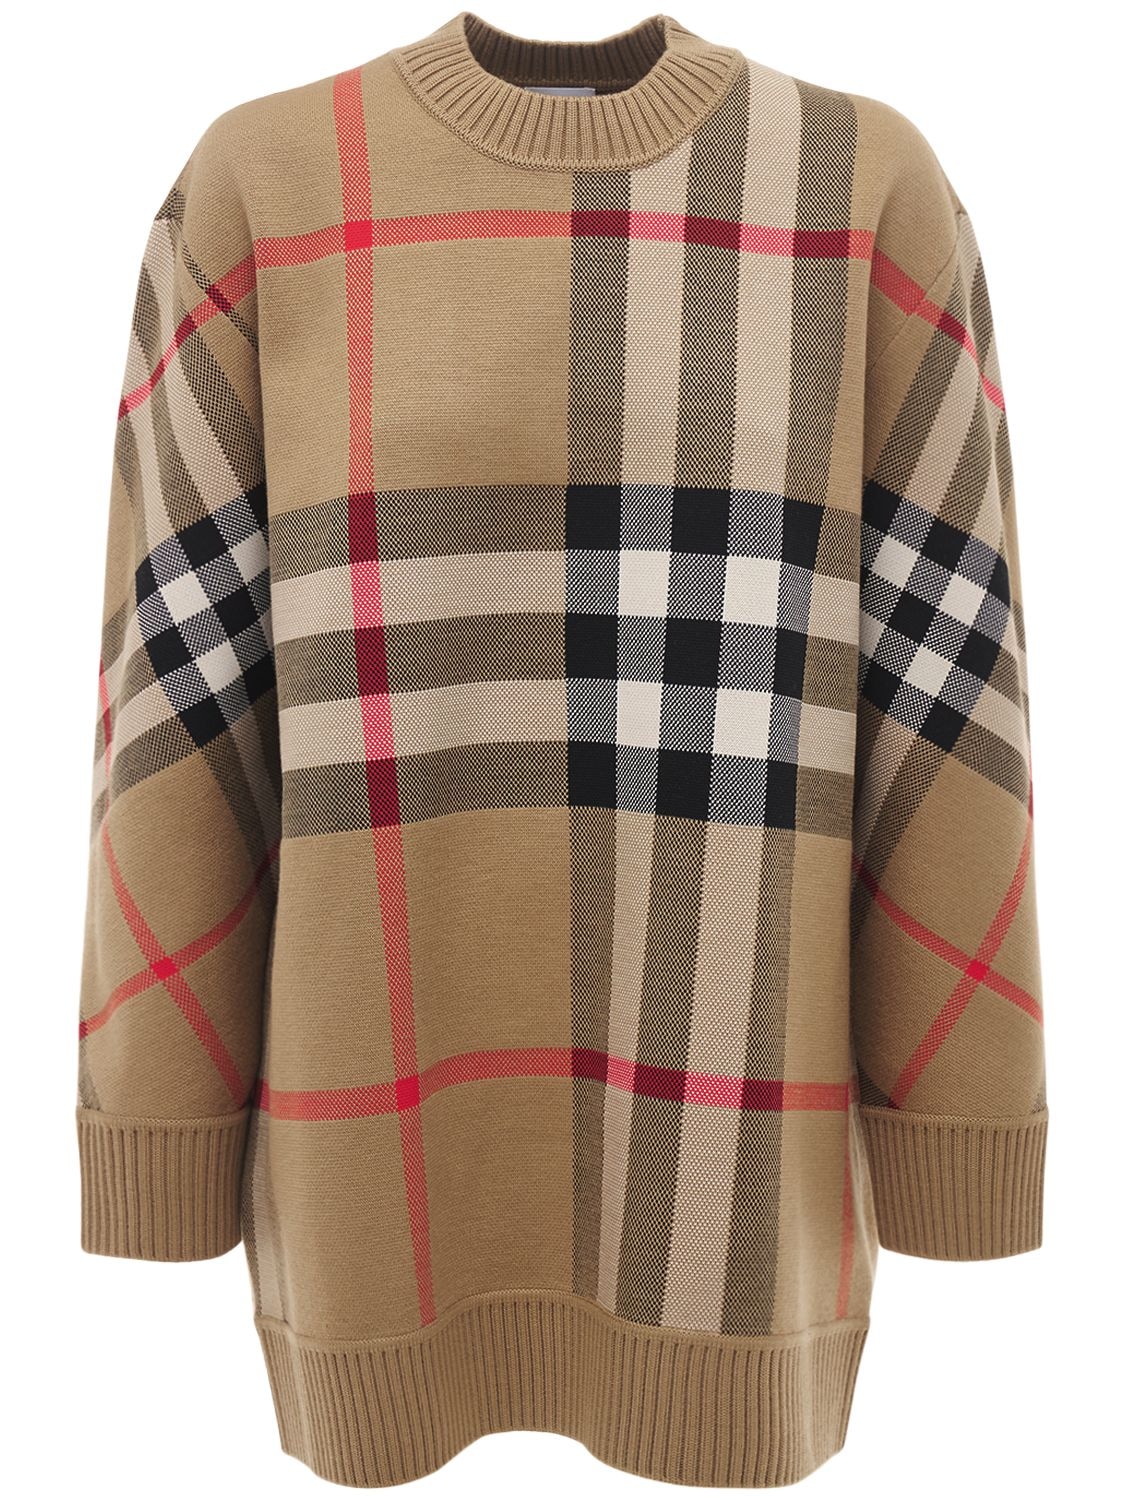 Burberry - Calee wool blend check crewneck sweater - Multicolor ...